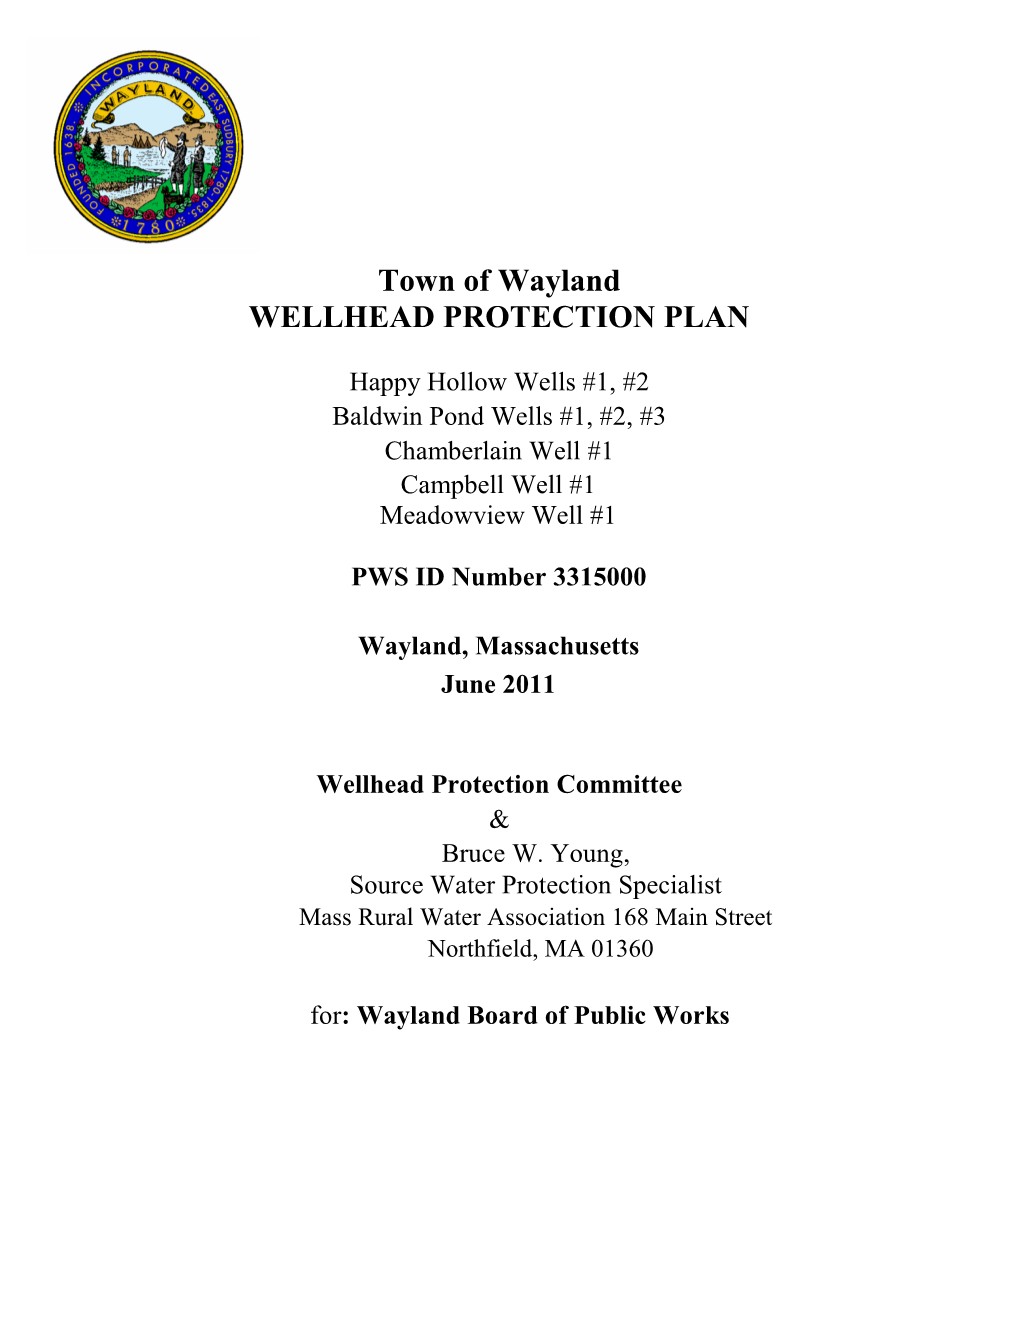 Town of Wayland WELLHEAD PROTECTION PLAN